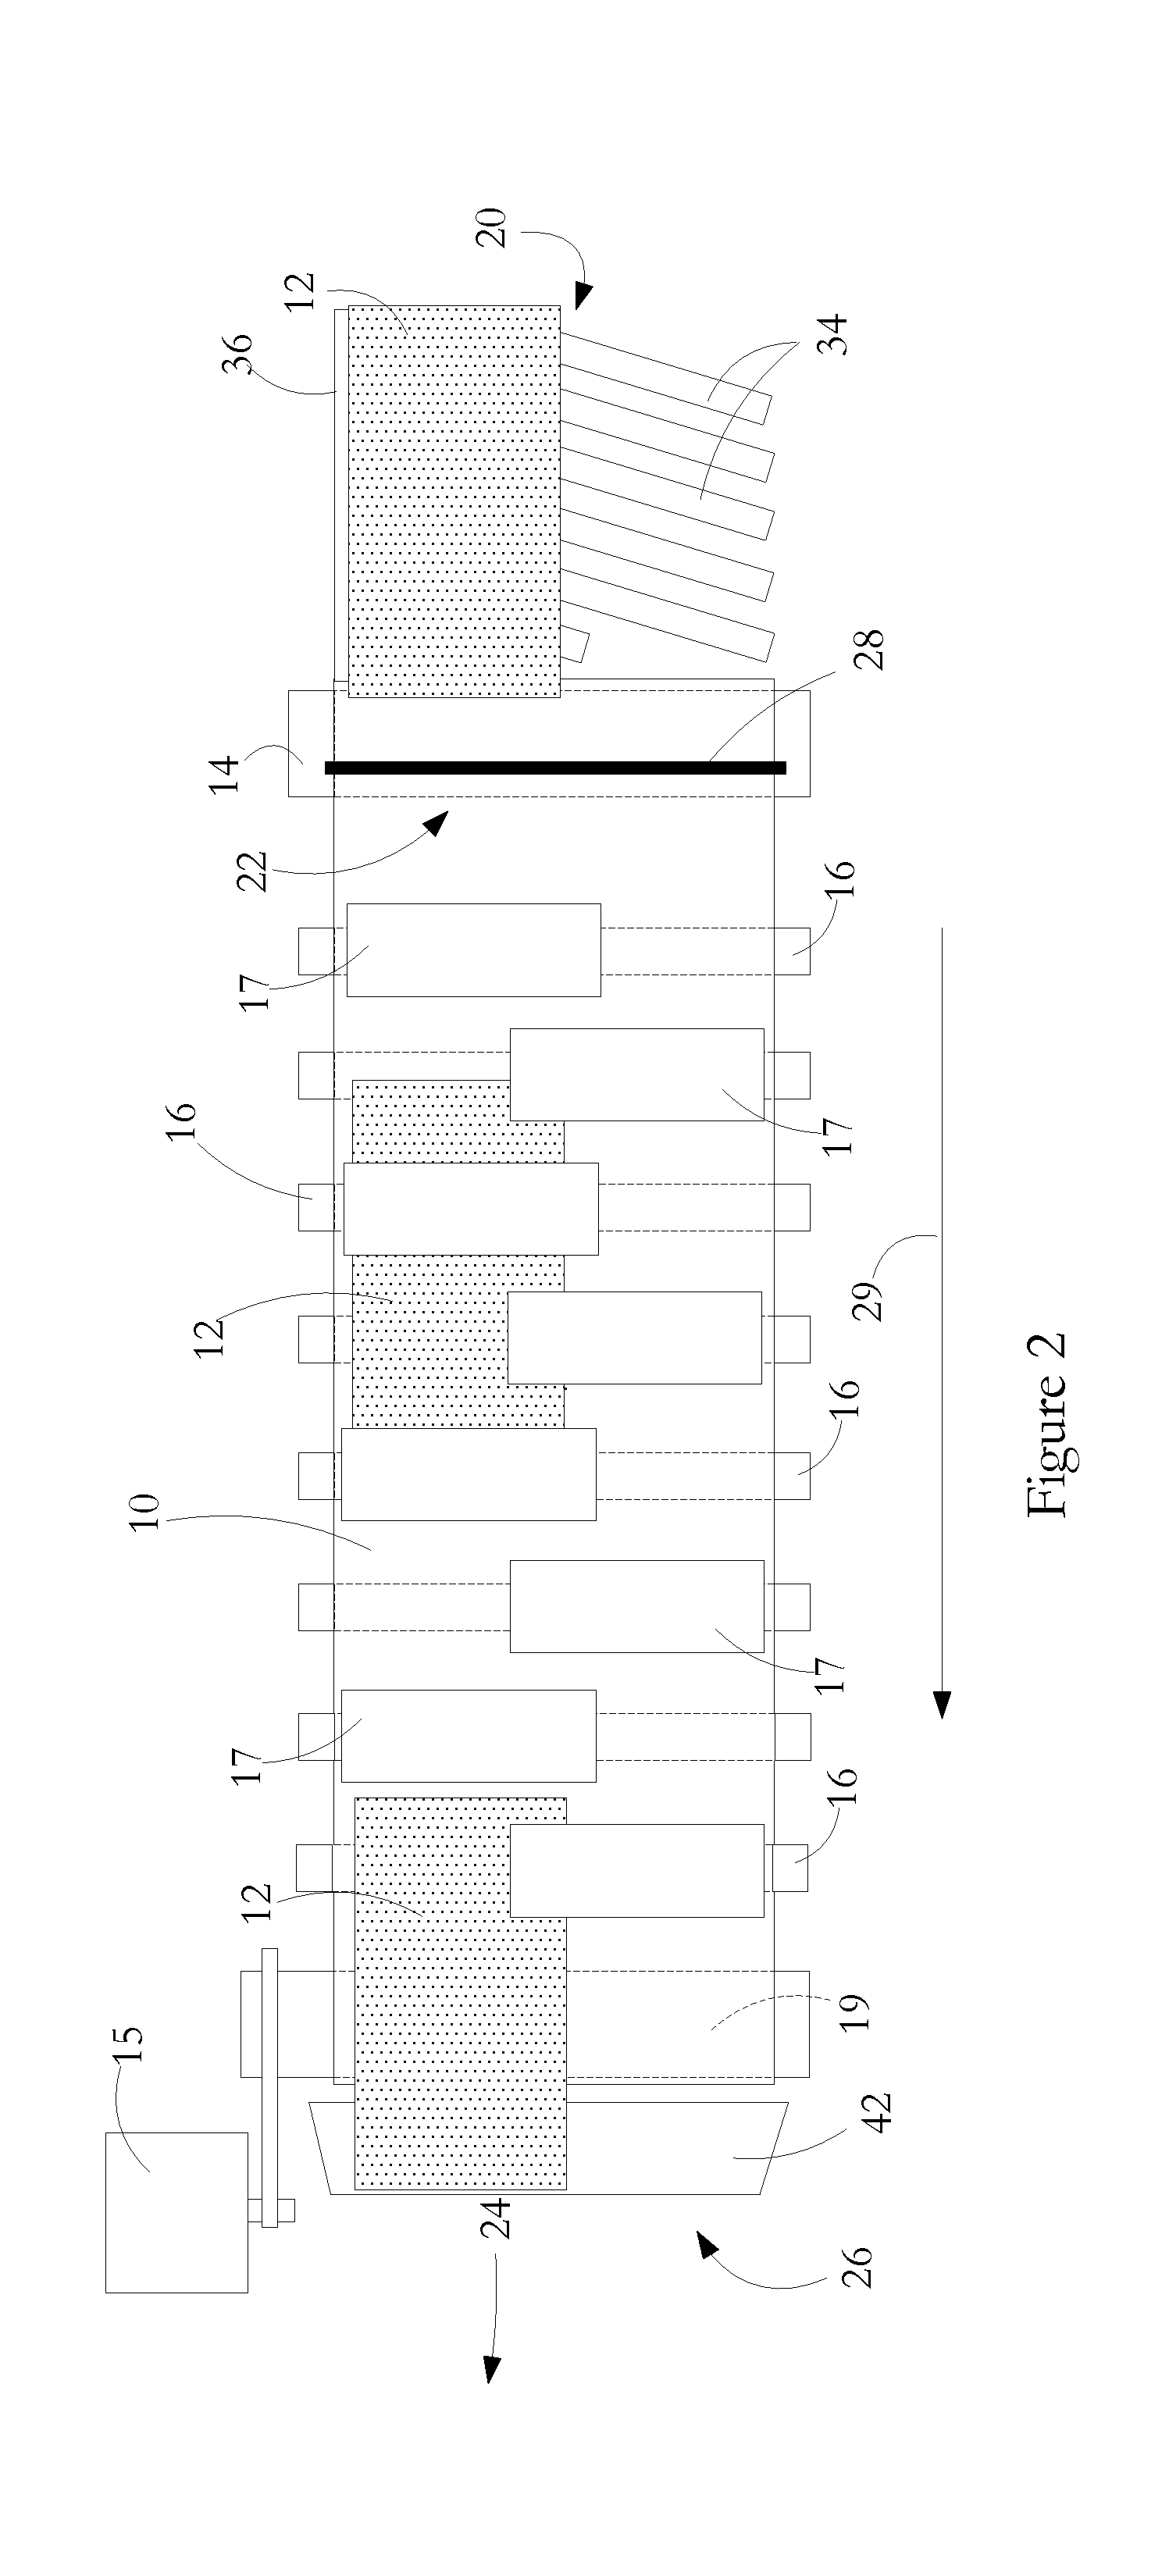 Multiple print head printing apparatus and method of operation